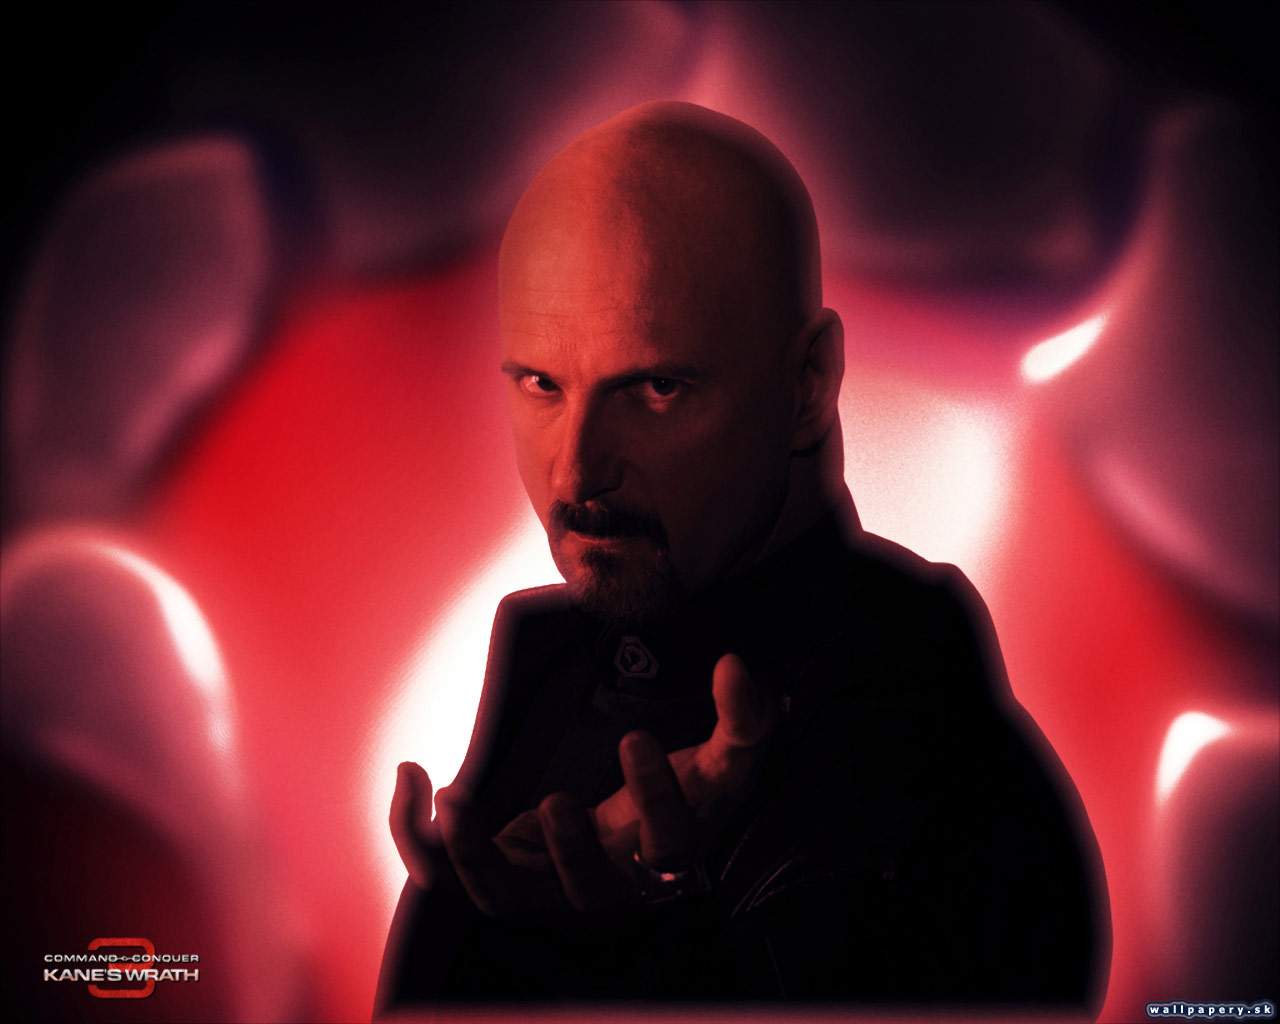 Command & Conquer 3: Kane's Wrath - wallpaper 1